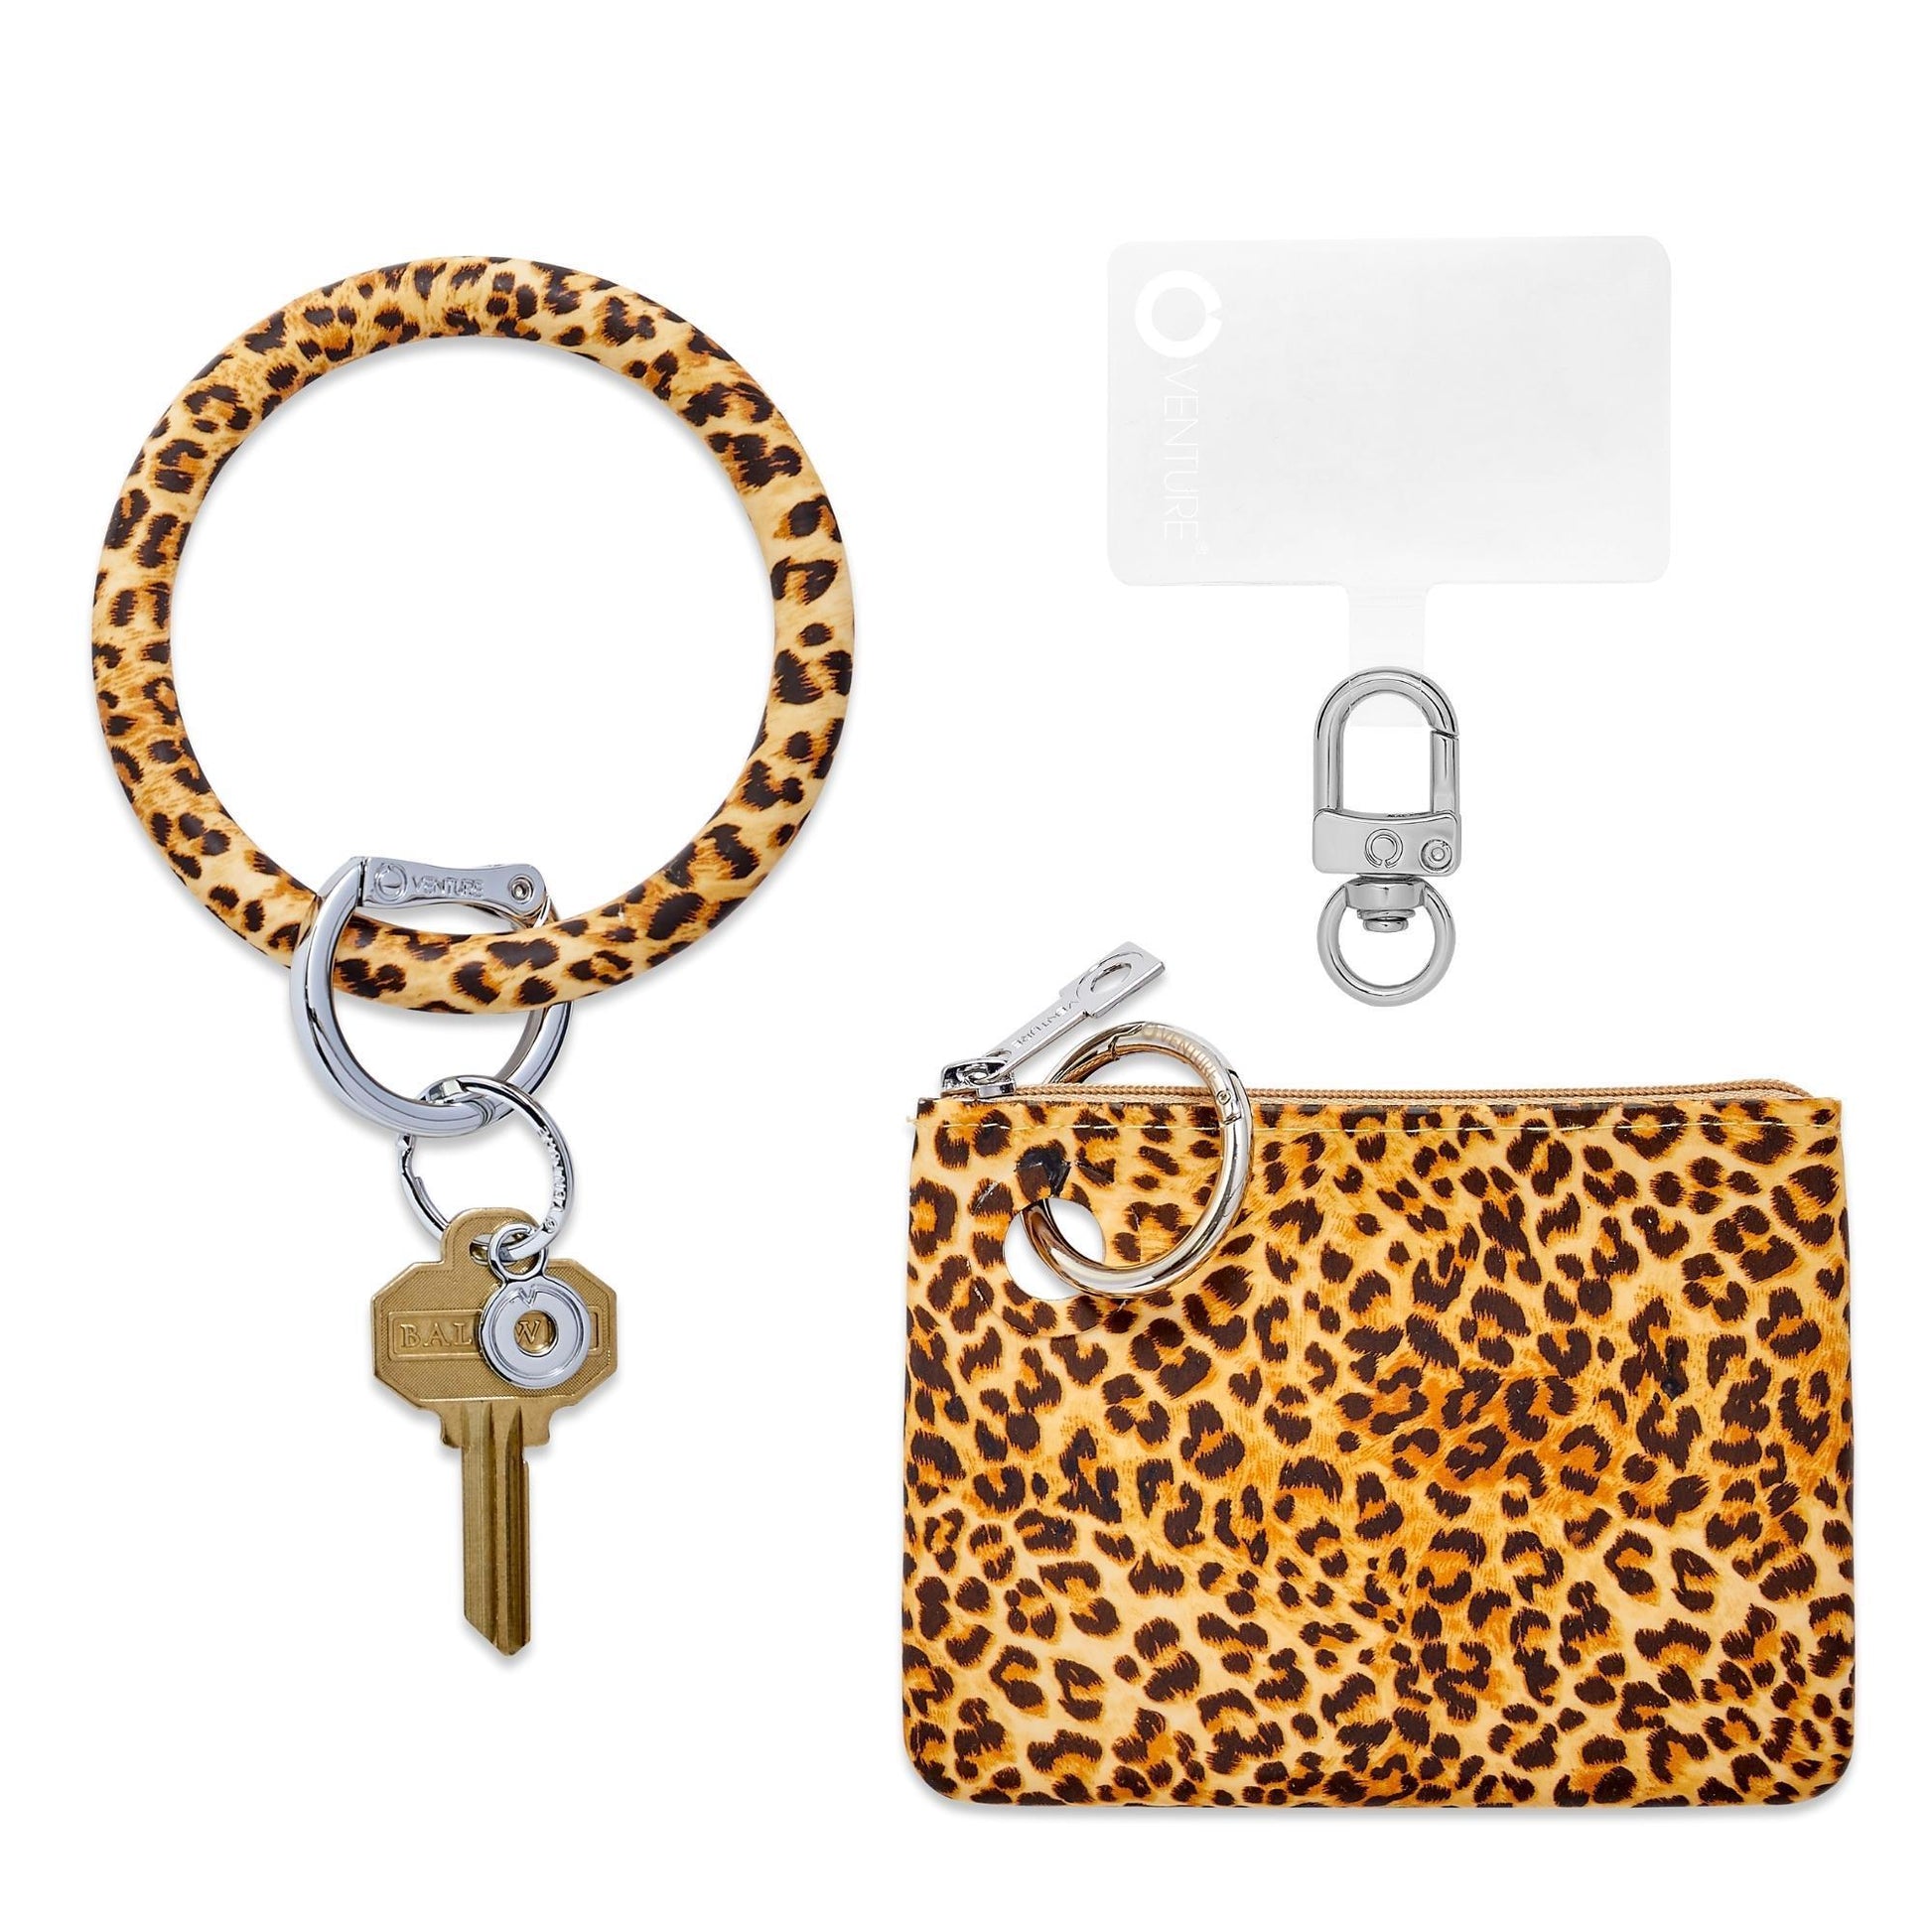 3-in-1 Cheetah Mini Silicone Pouch Set - Oventure contains a big o key ring in cheetah print silicone with a mini silicone wallet in cheetah print and a phone connector with silver hardware